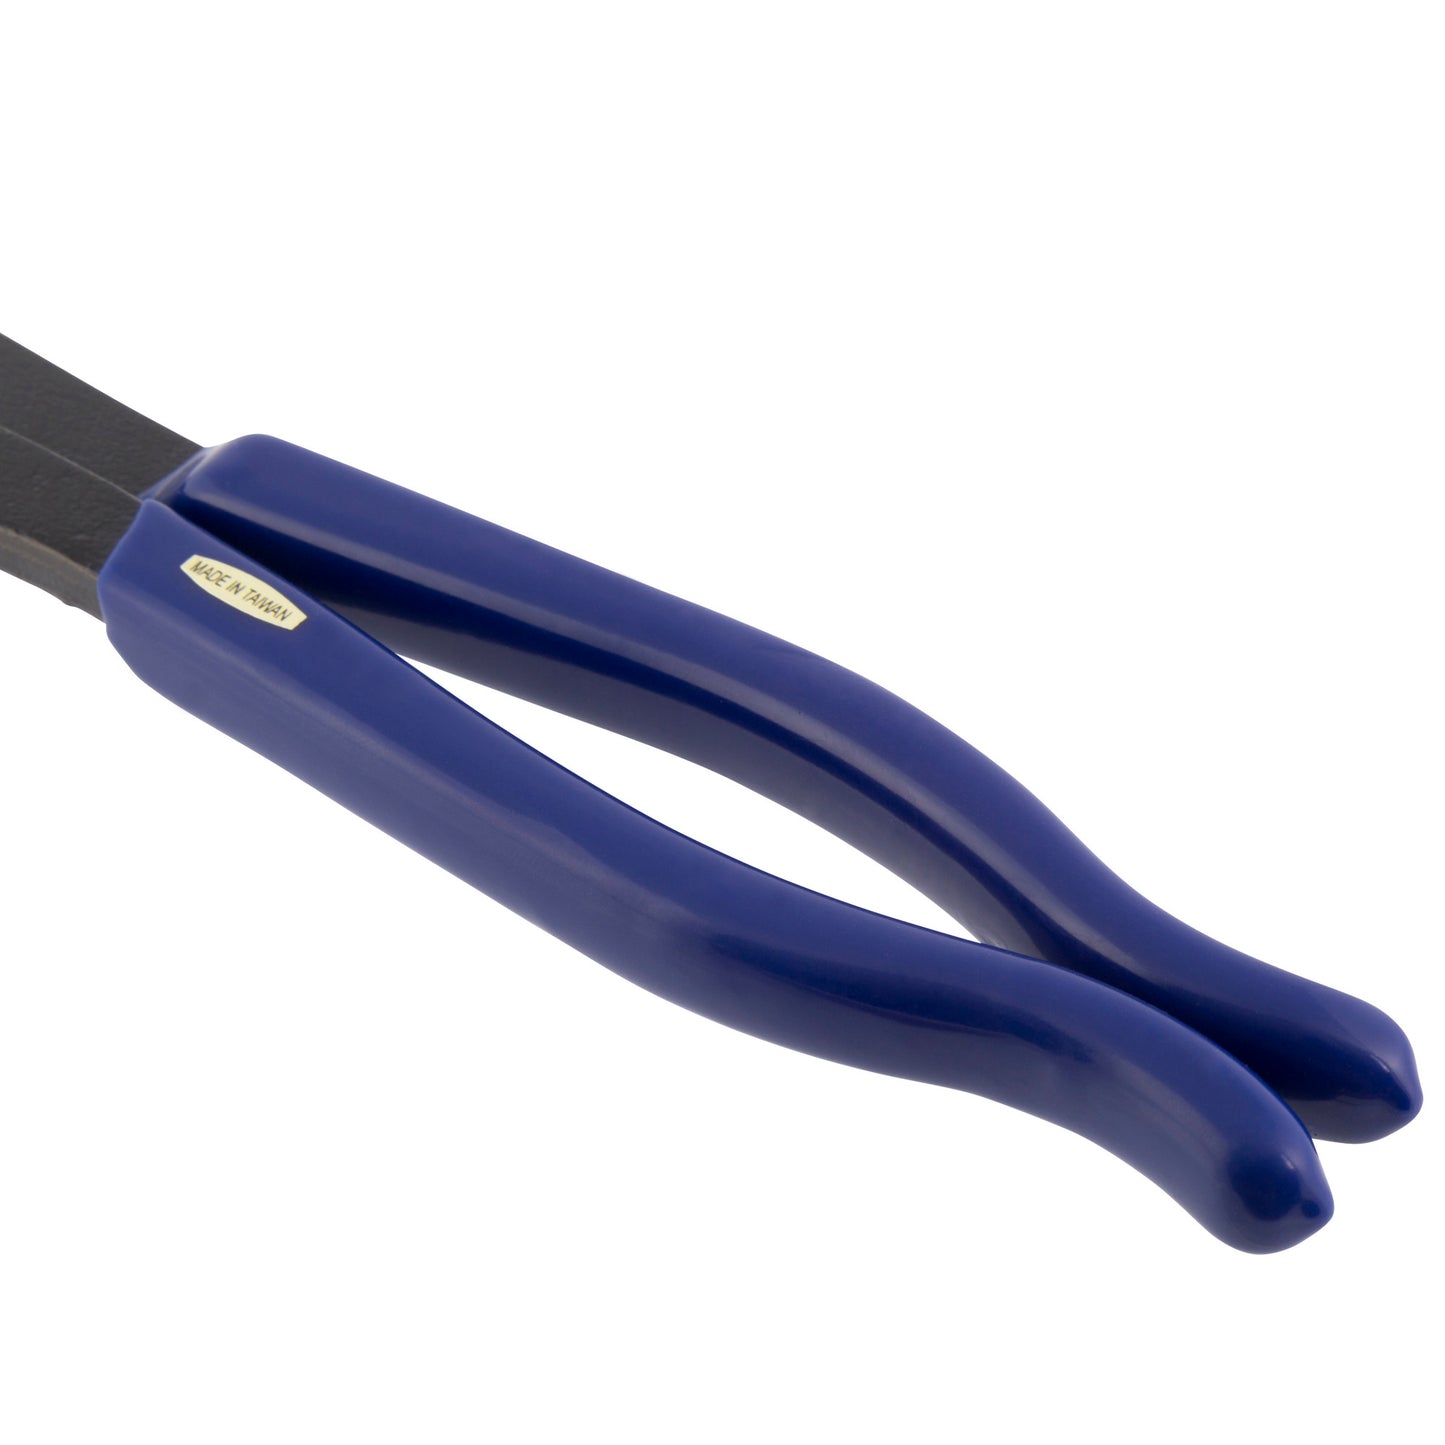 12-inch Large Oil Filter Pliers